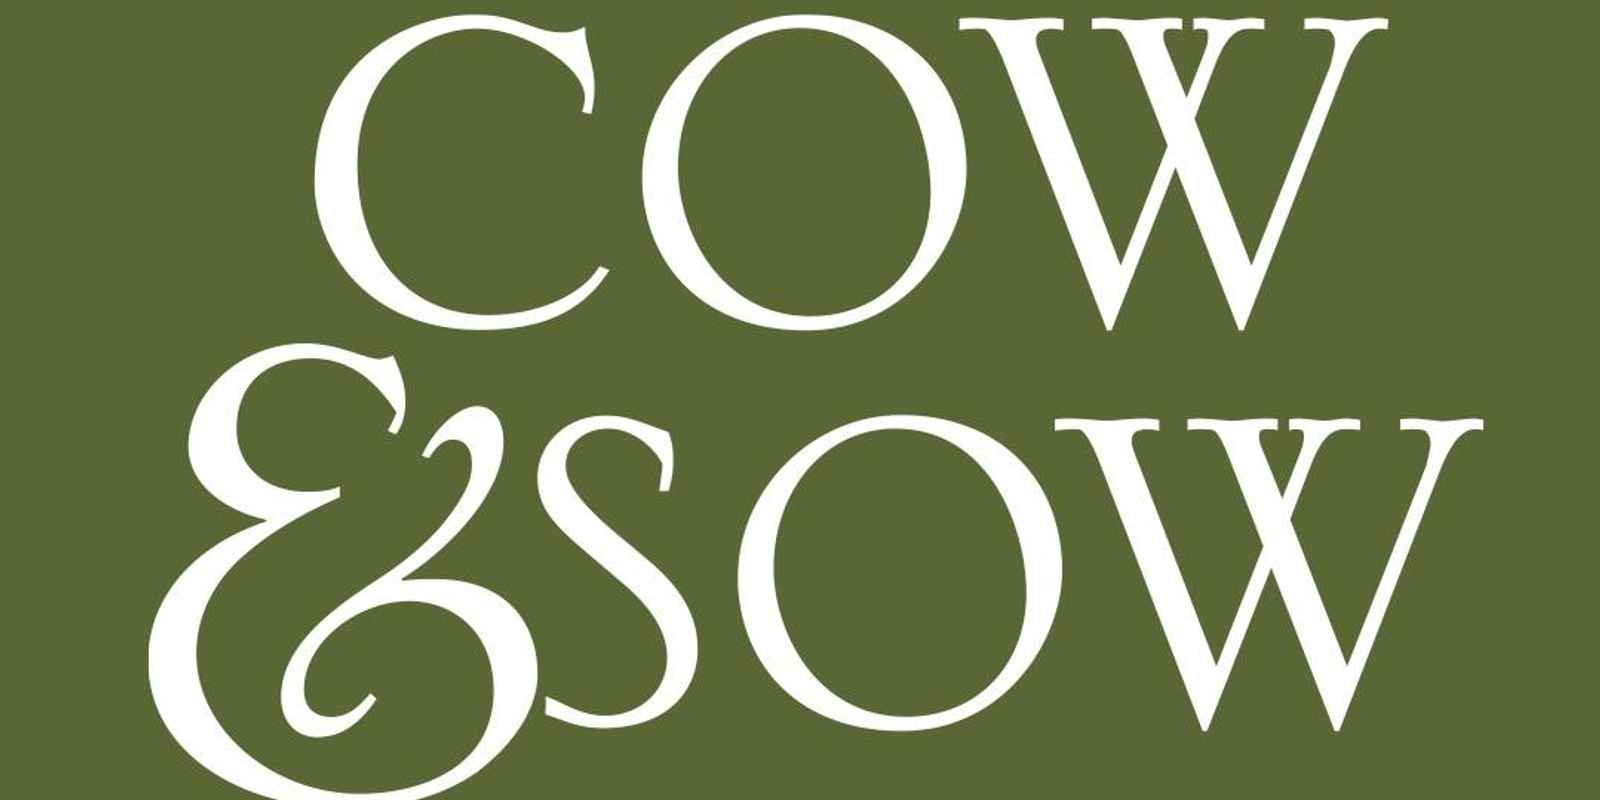 Cow & Sow